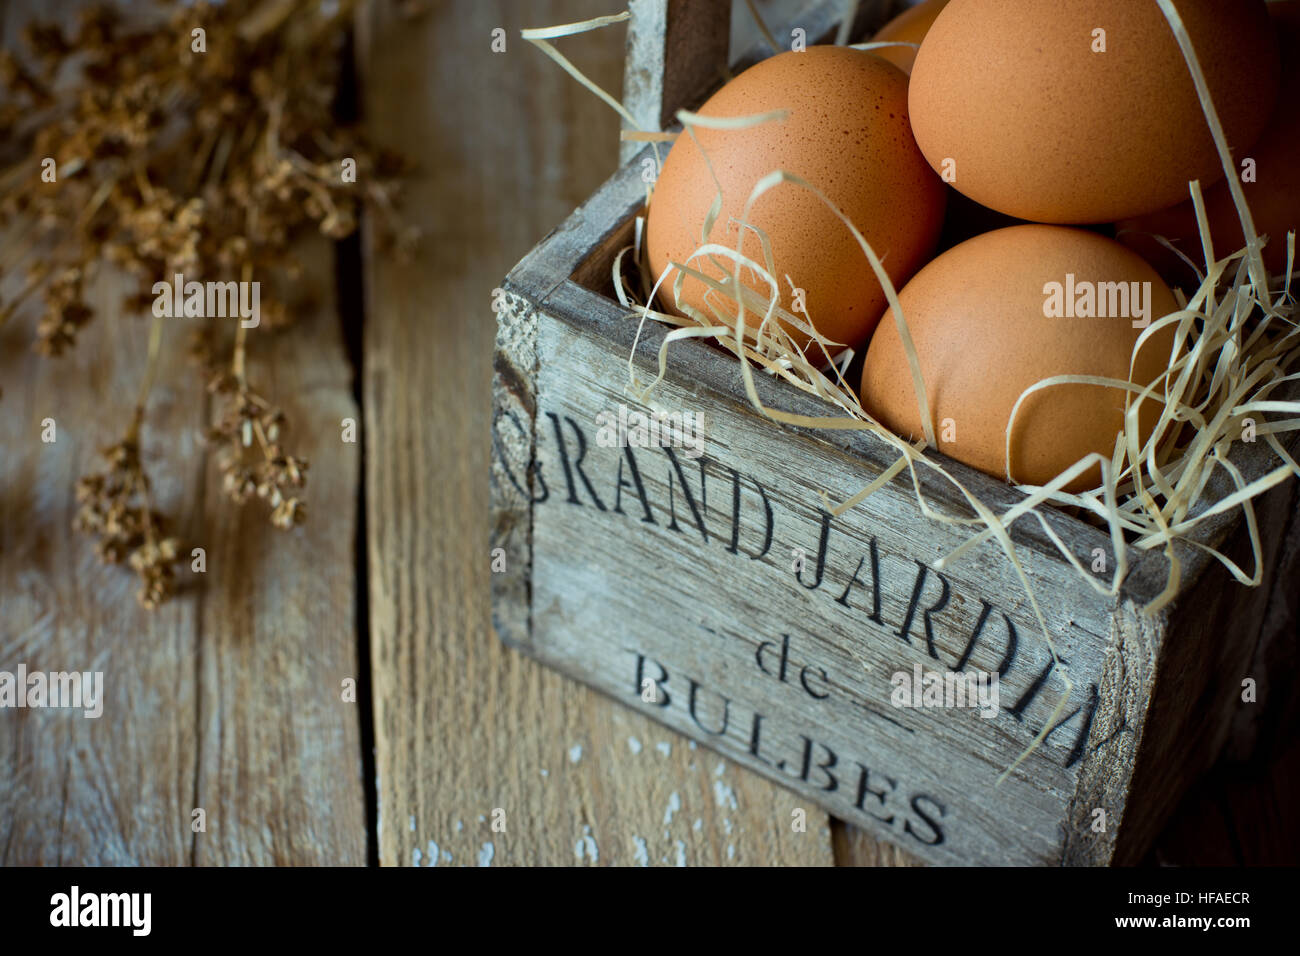 Fresh brown eggs on straw in a vintage shabby chic wood box, dry beige flowers,barn wood background,Easter,kinfolk,minimalistic Stock Photo